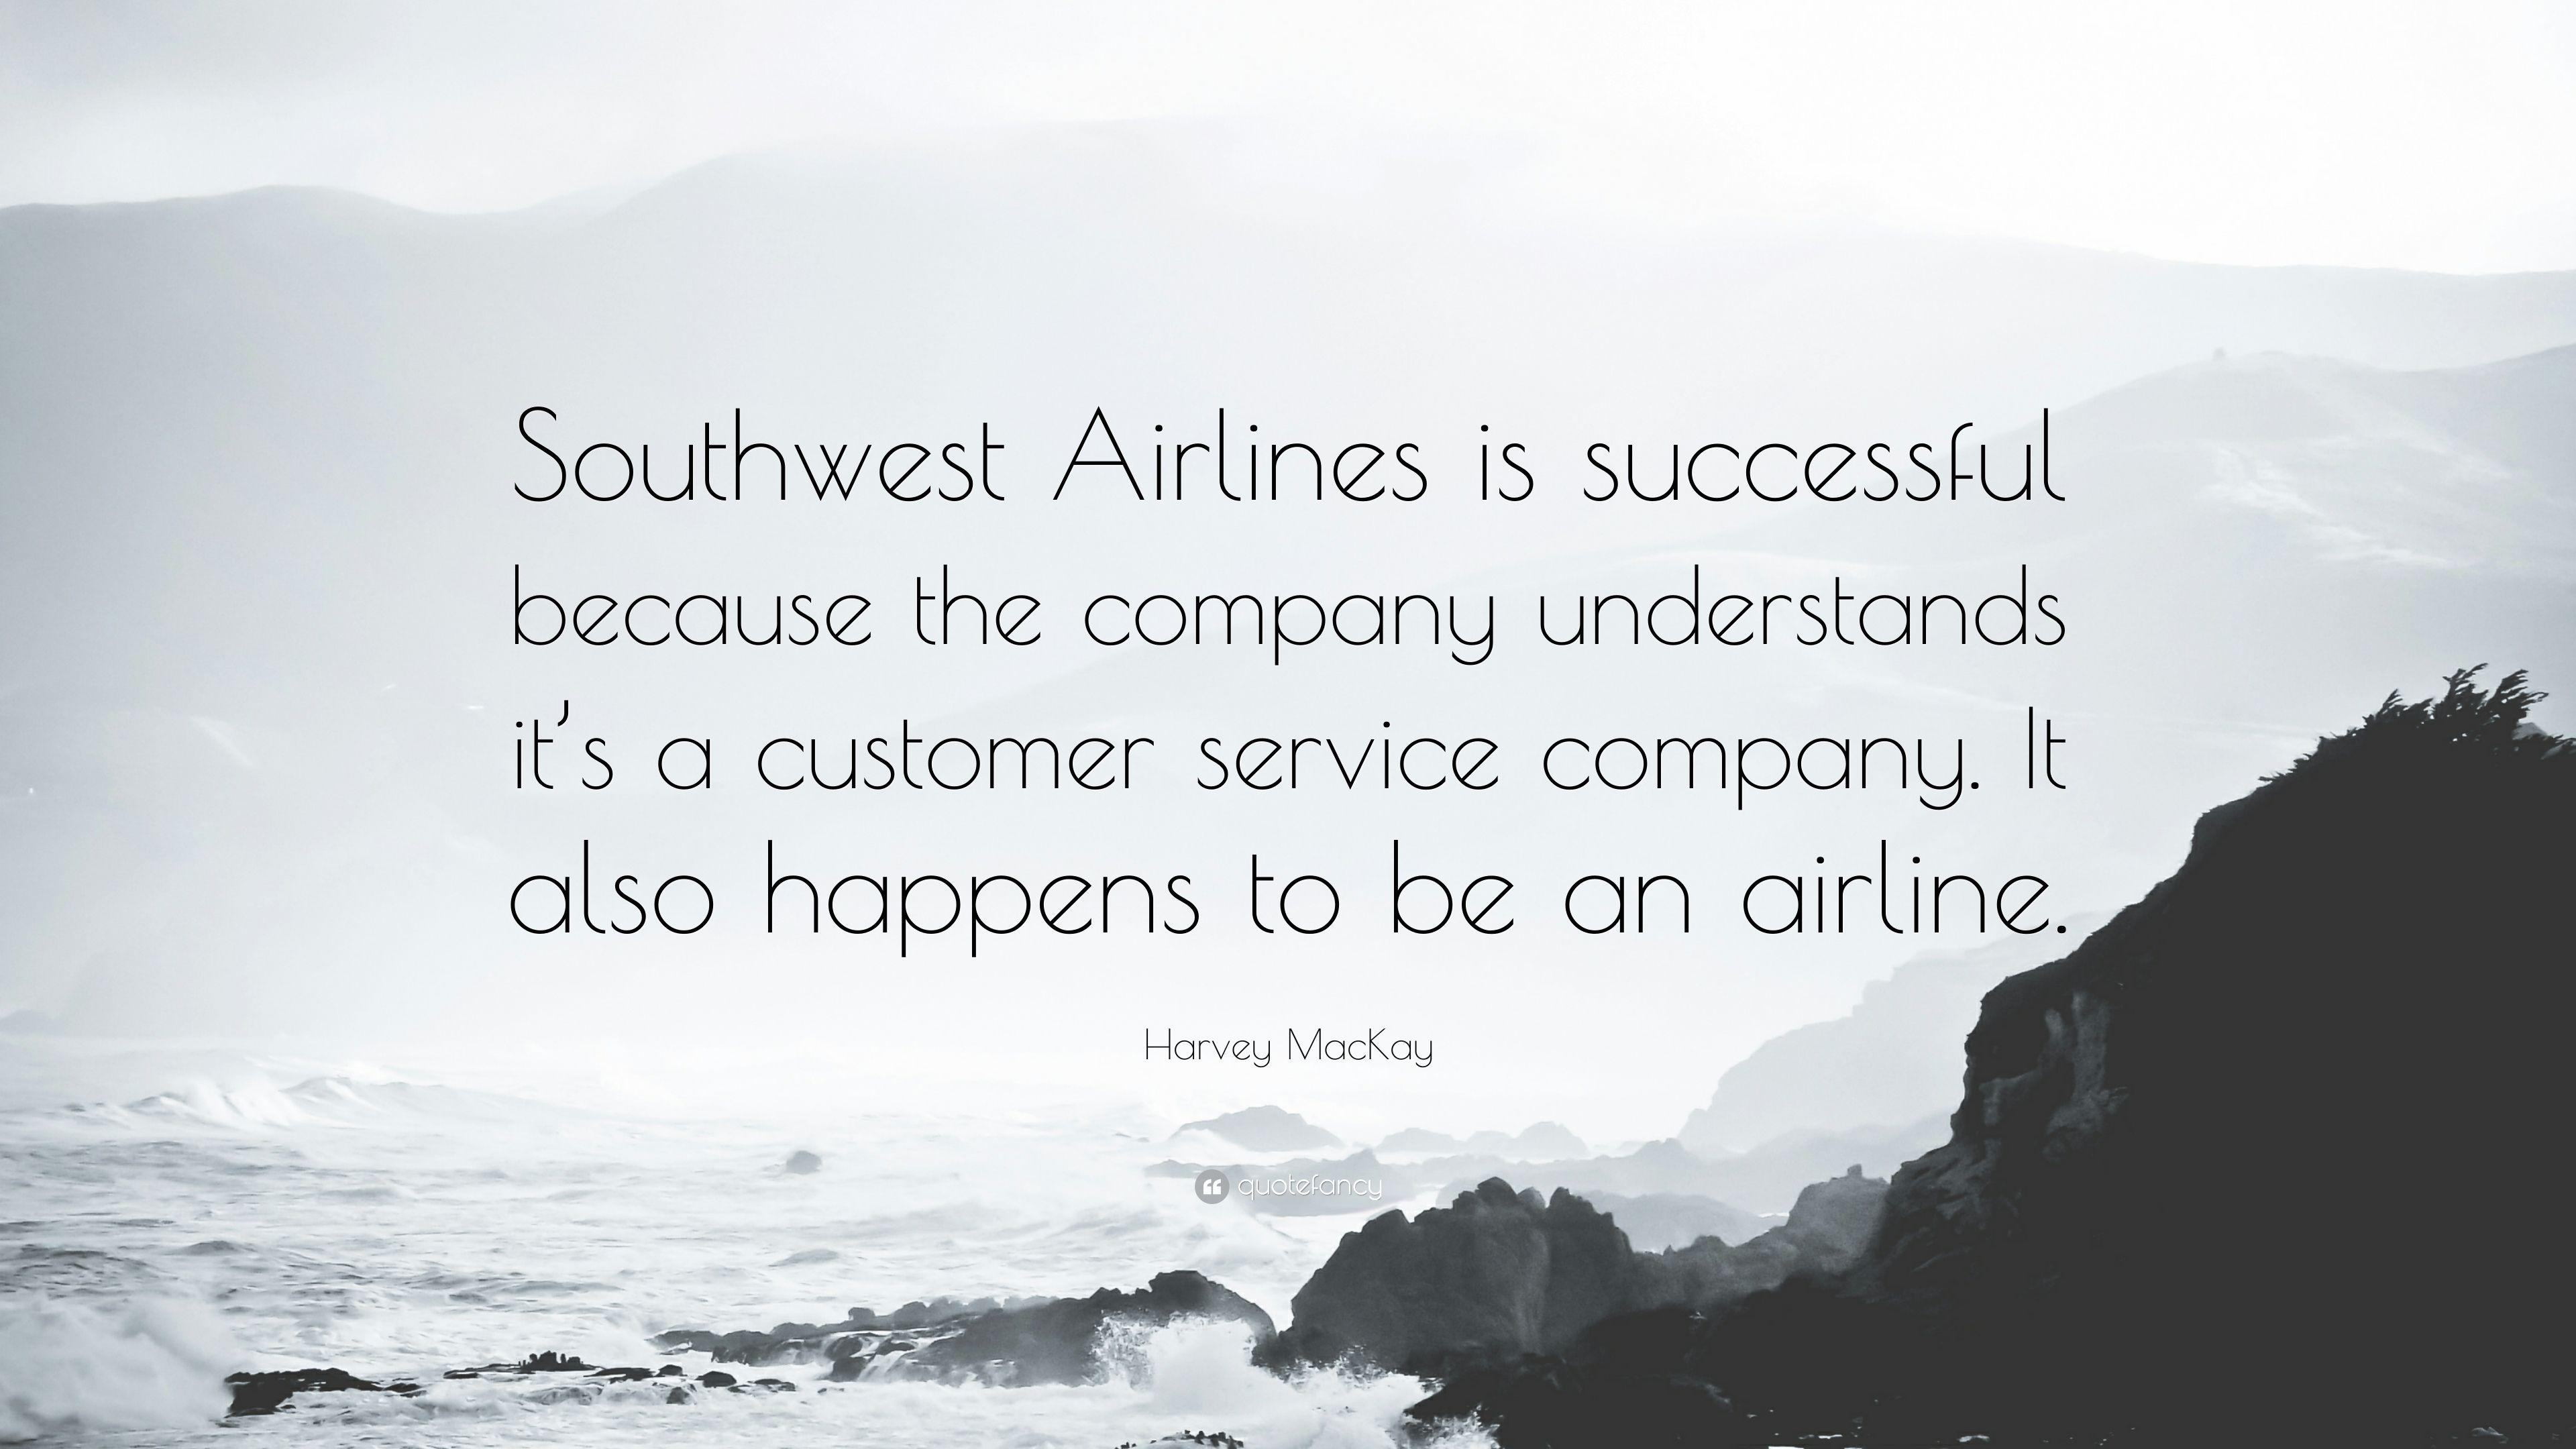 Harvey MacKay Quote: “Southwest Airlines is successful because